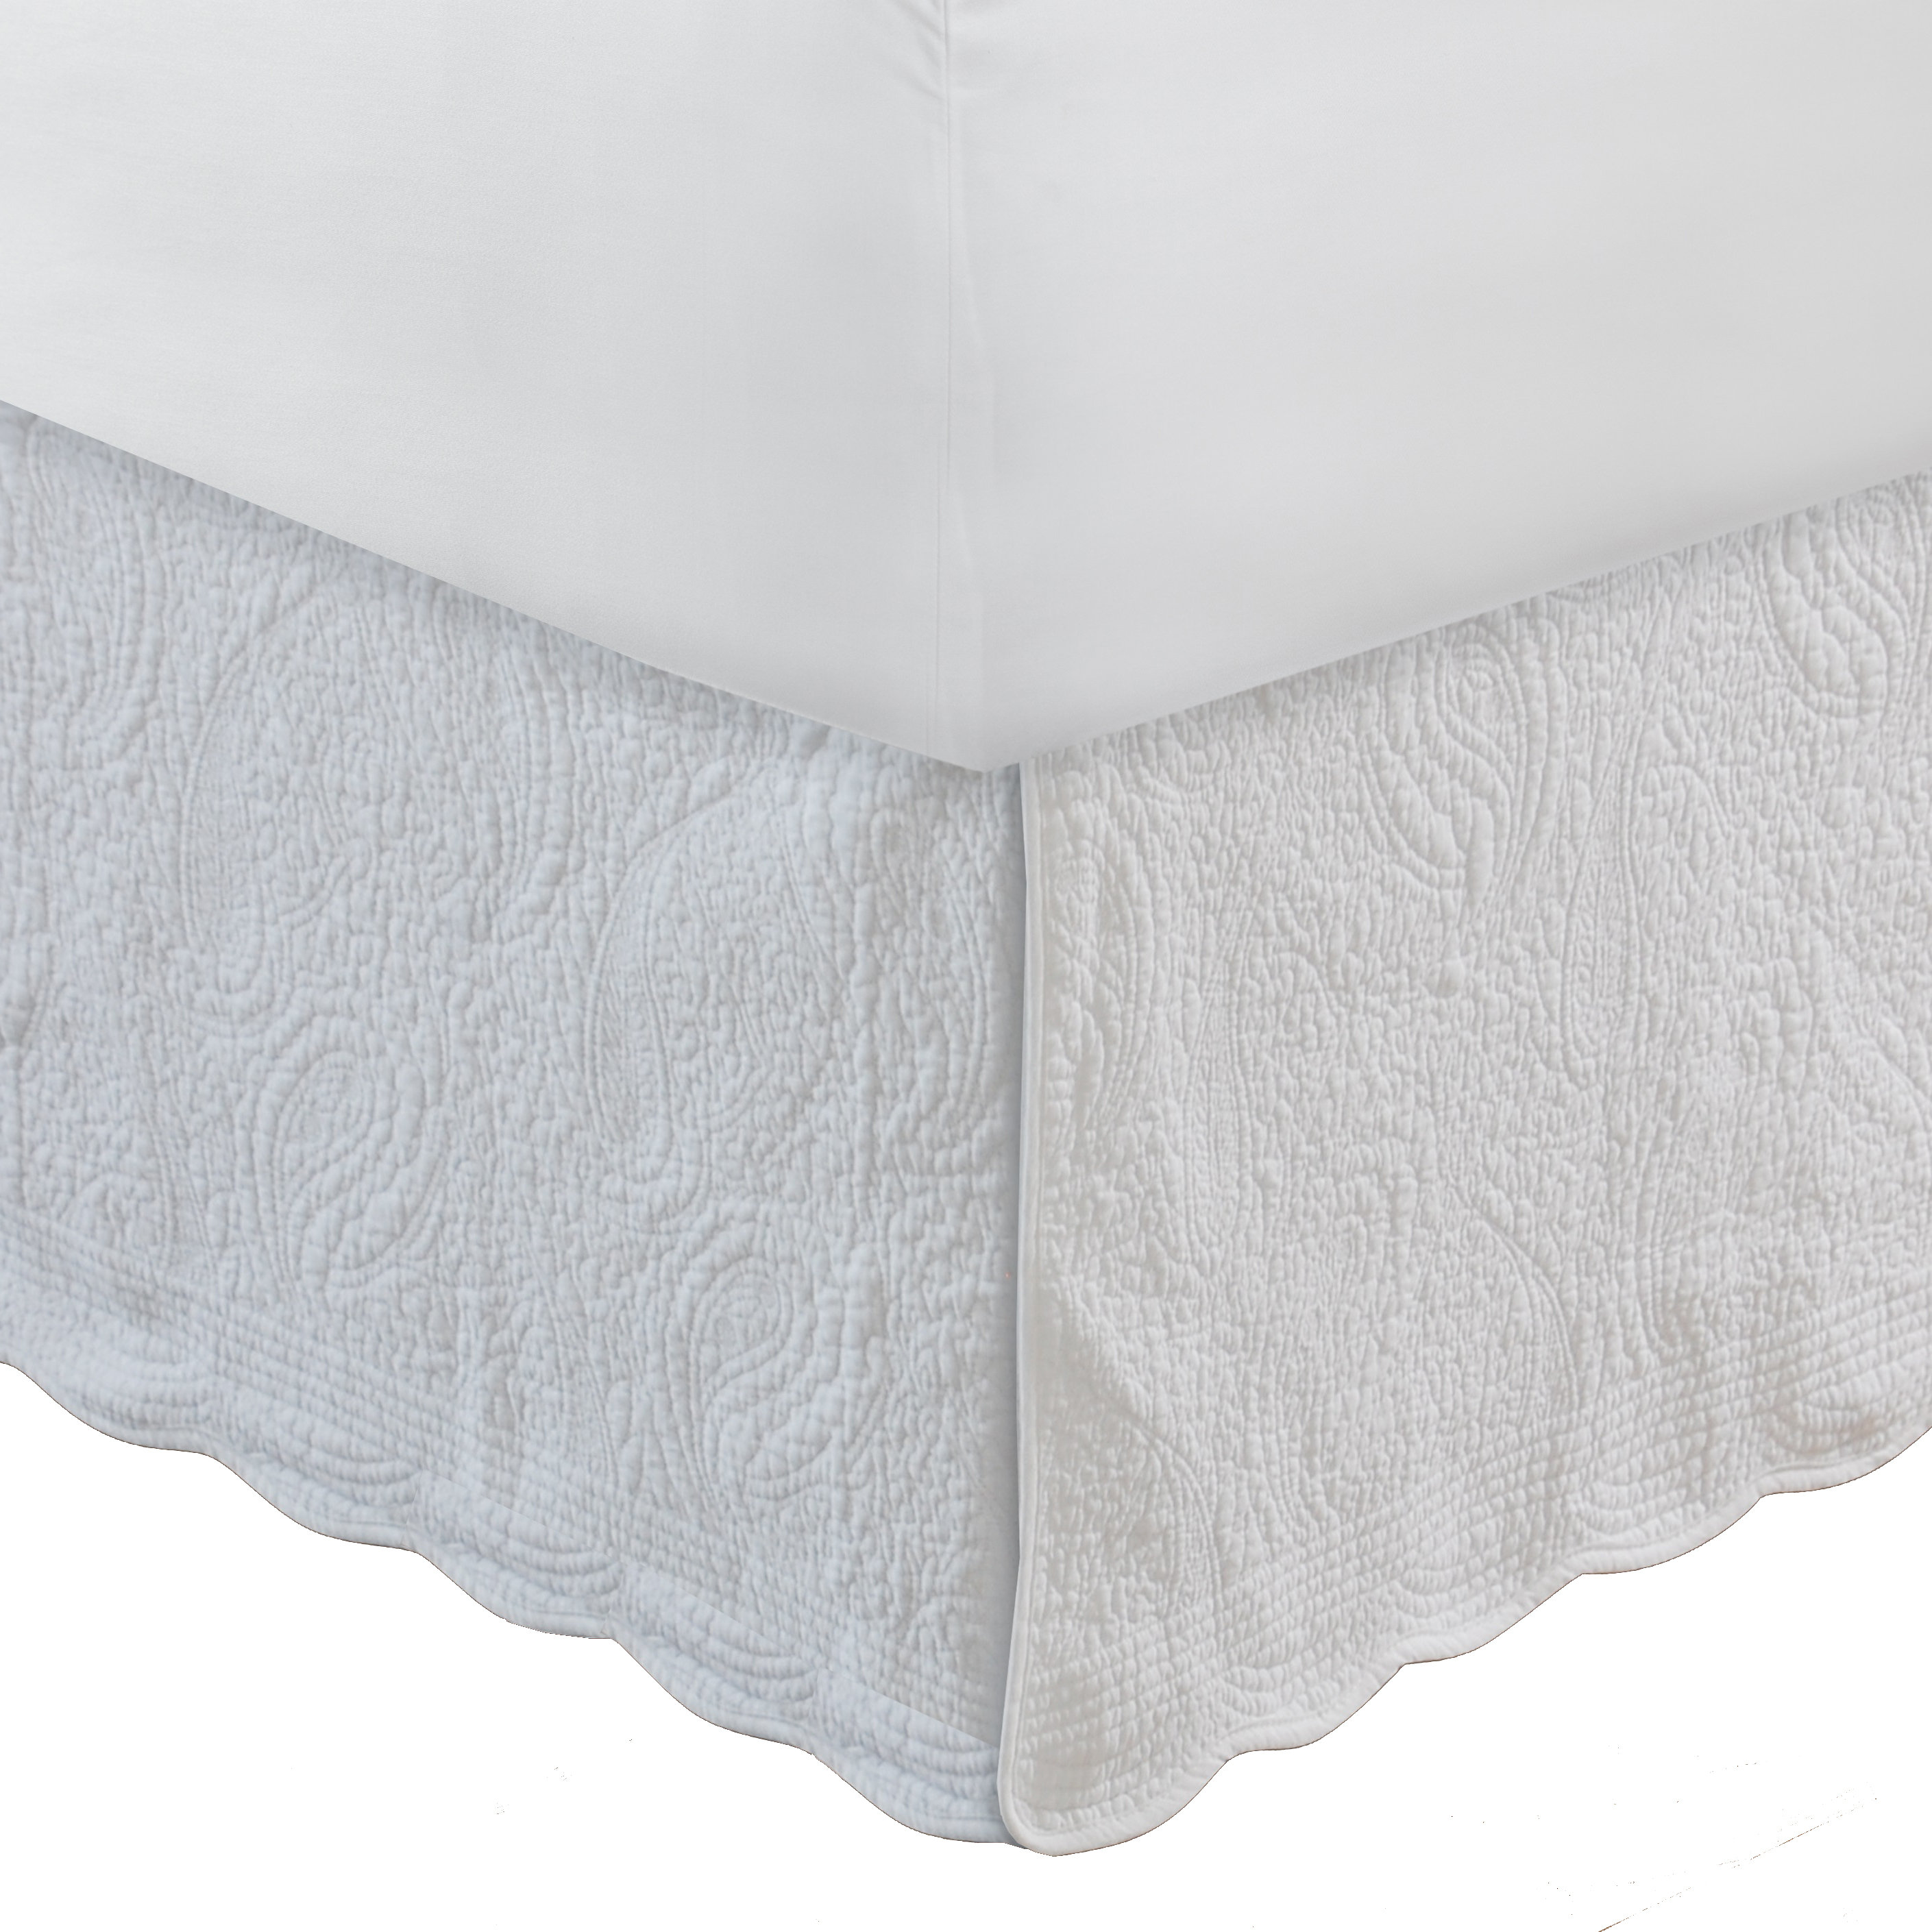 SKY BEDDINGS - Bed Skirt Queen Size Ruffled Bed Skirt with Split Corners -  Queen 21 Inch Drop Dust Ruffle Bed Skirt with Platform Three Sided Coverage  - 100% Microfiber Bed Skirt,